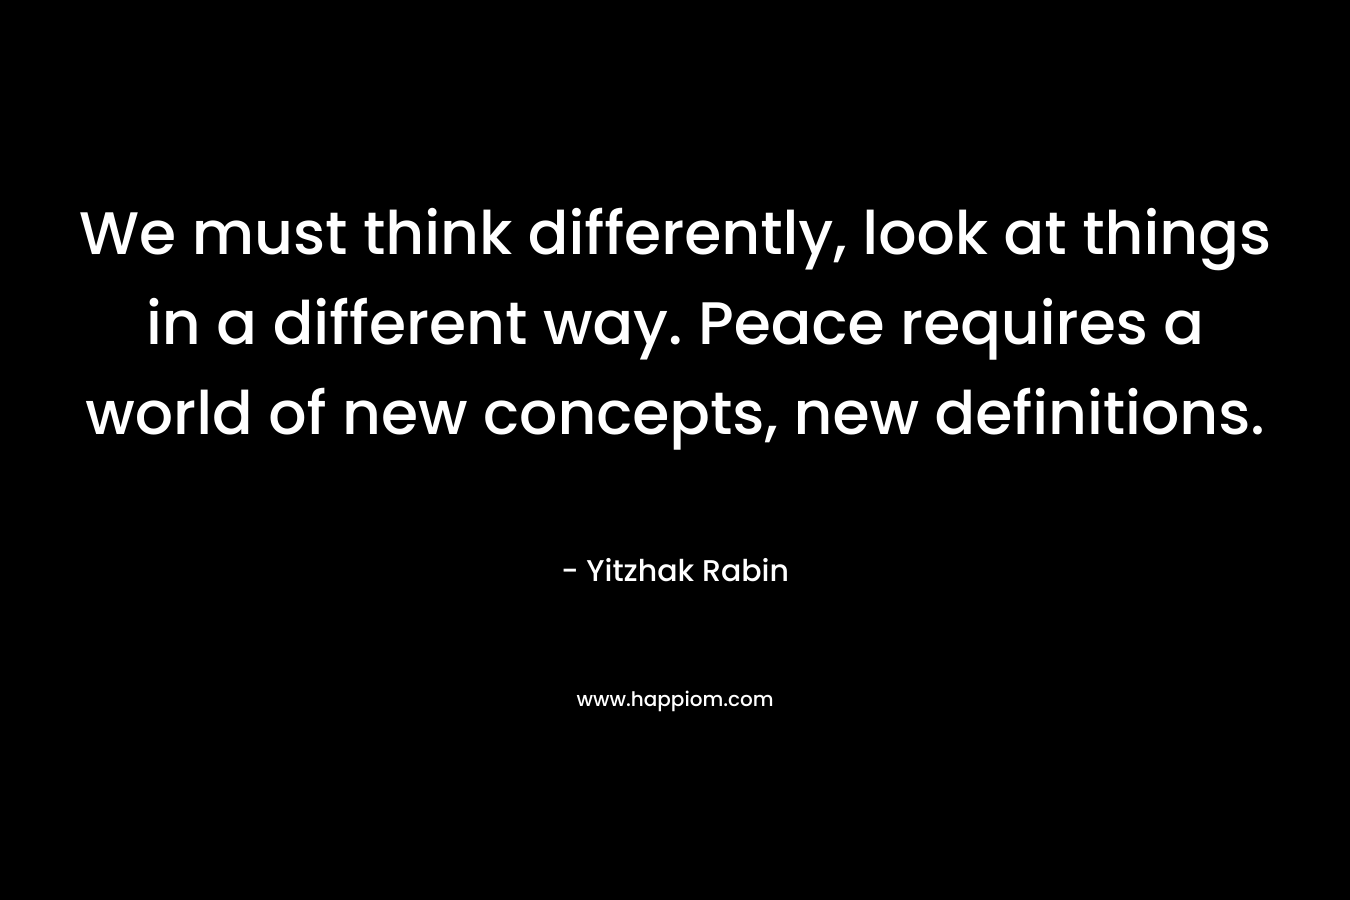 We must think differently, look at things in a different way. Peace requires a world of new concepts, new definitions.